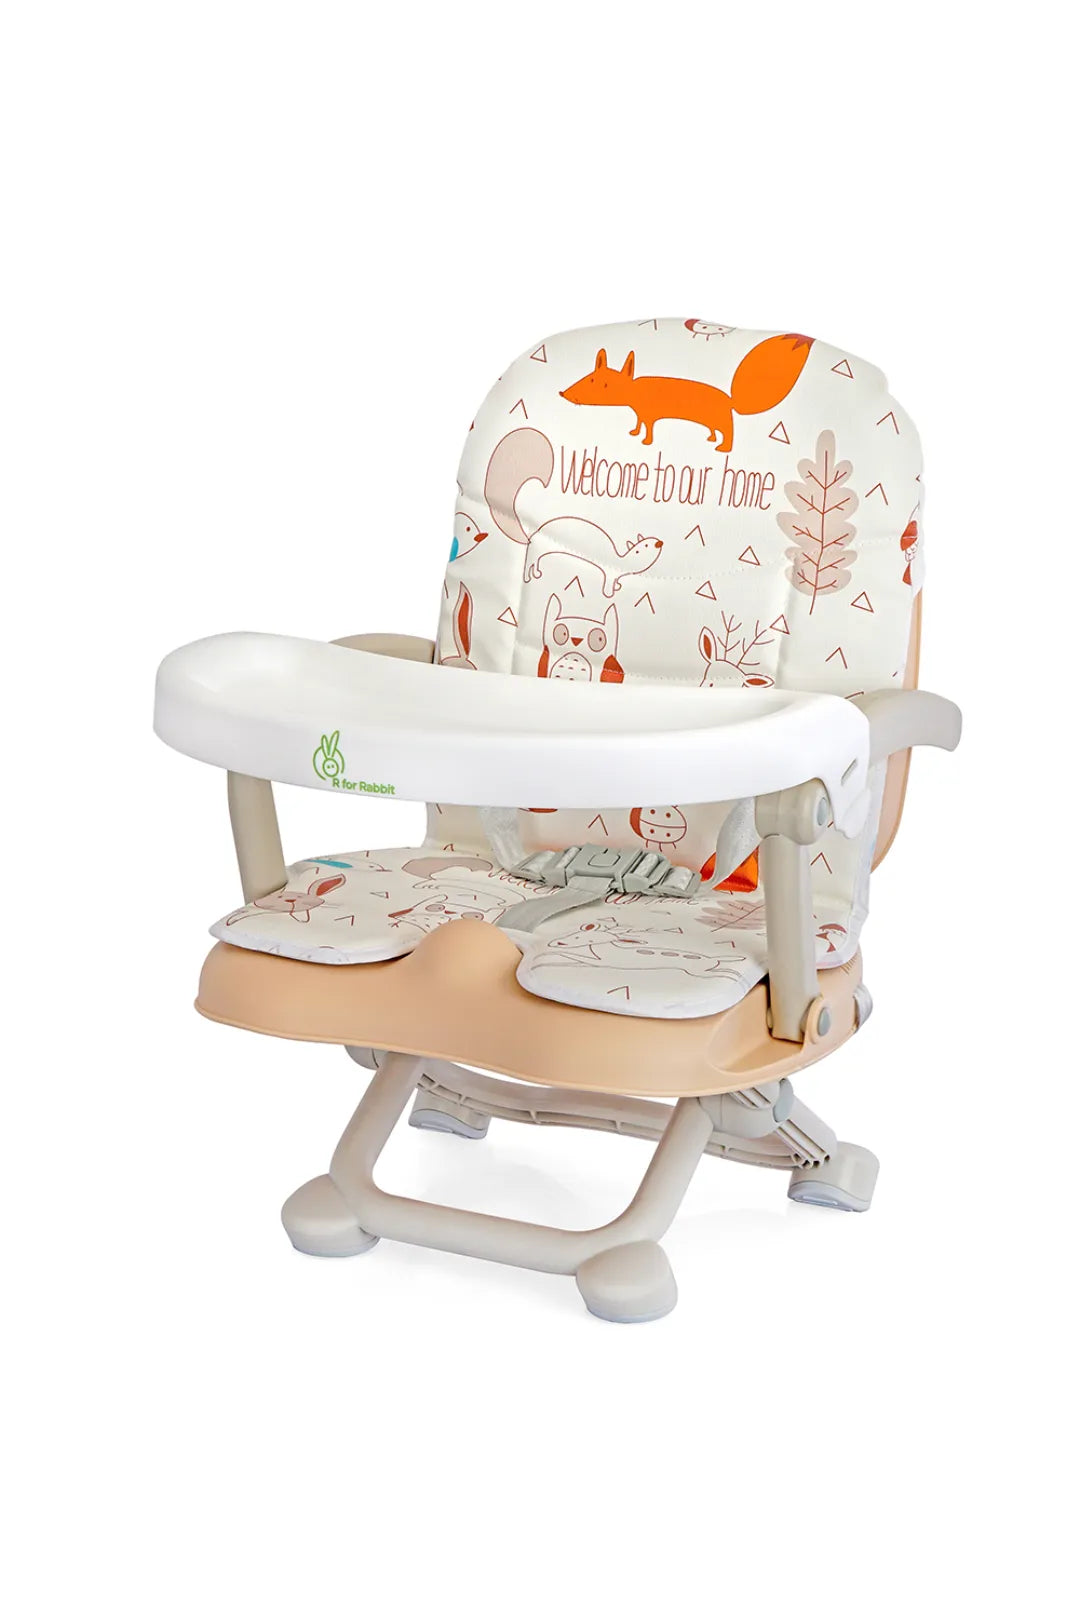 Candy Pop 2 in 1 Booster Chair with Safety Belt and Removable Dining Tray for Baby